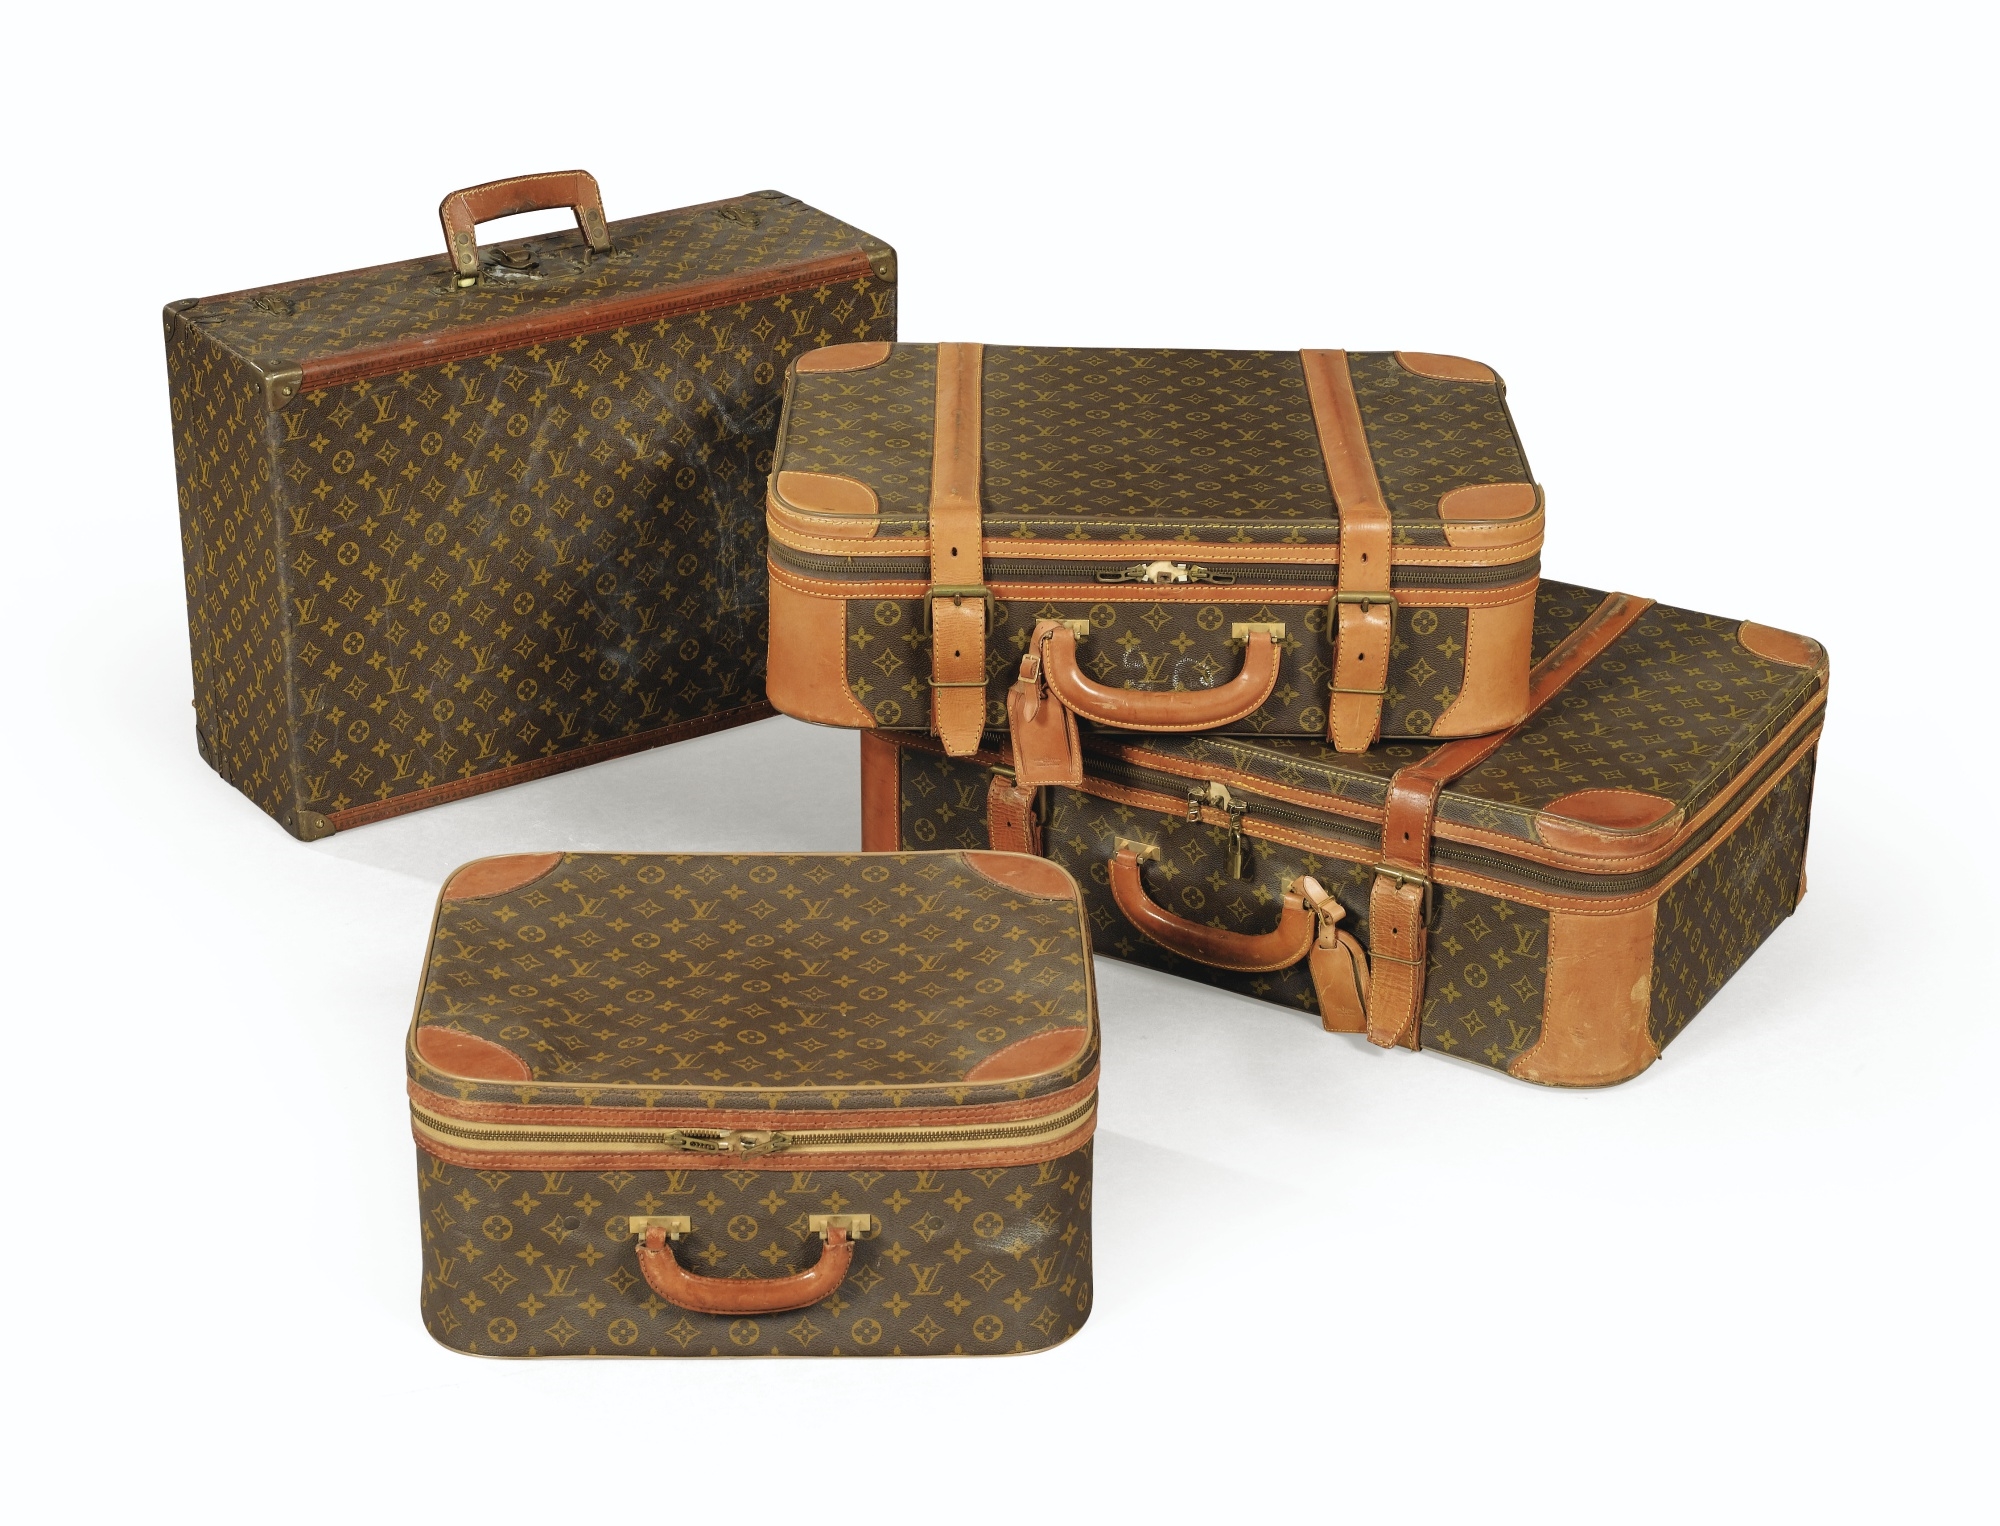 Sold at Auction: A Vintage Louis Vuitton Alzer Luggage